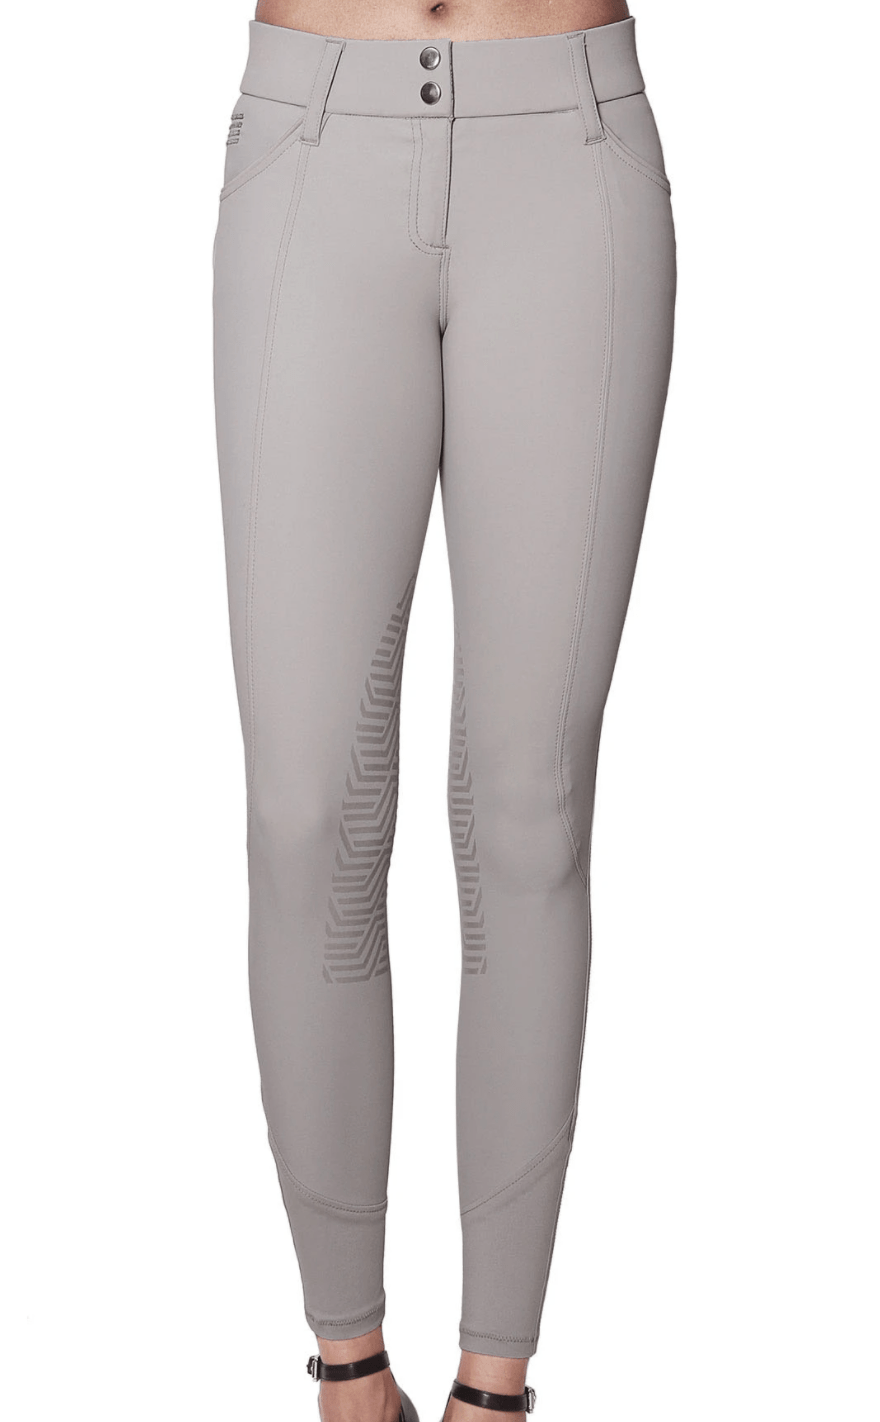 GhoDho Breeches GhoDho Aubrie Pro Beige Breeches equestrian team apparel online tack store mobile tack store custom farm apparel custom show stable clothing equestrian lifestyle horse show clothing riding clothes horses equestrian tack store